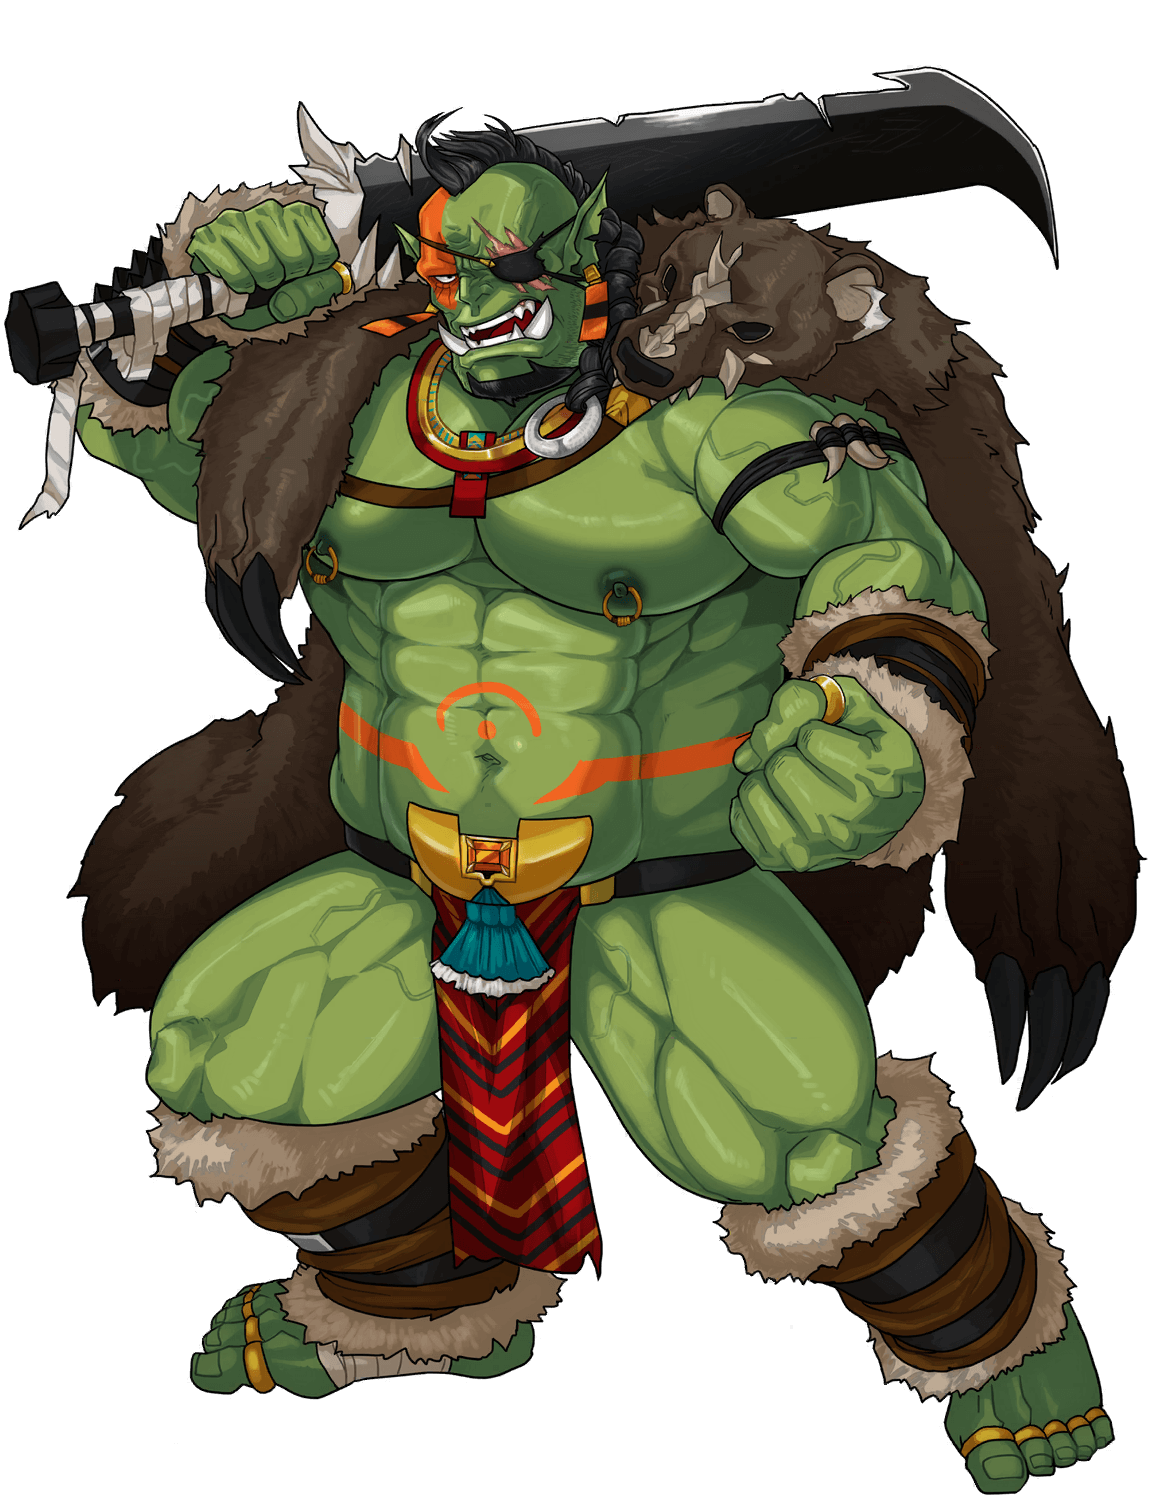 Orc Fighter